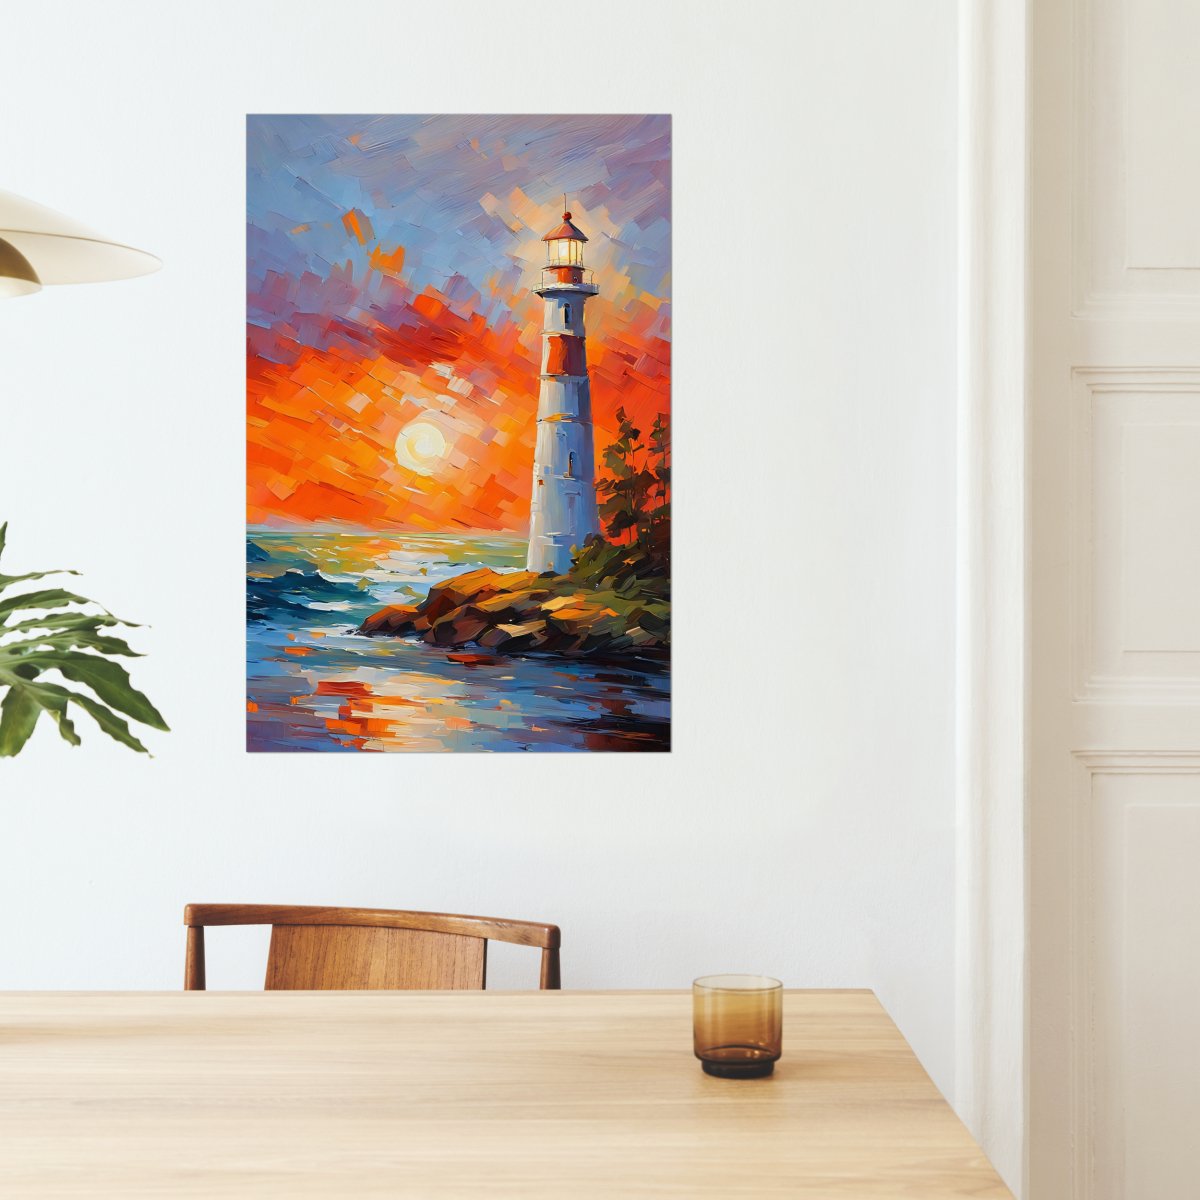 Lighthouse of the dusk - Art print - Poster - Ever colorful